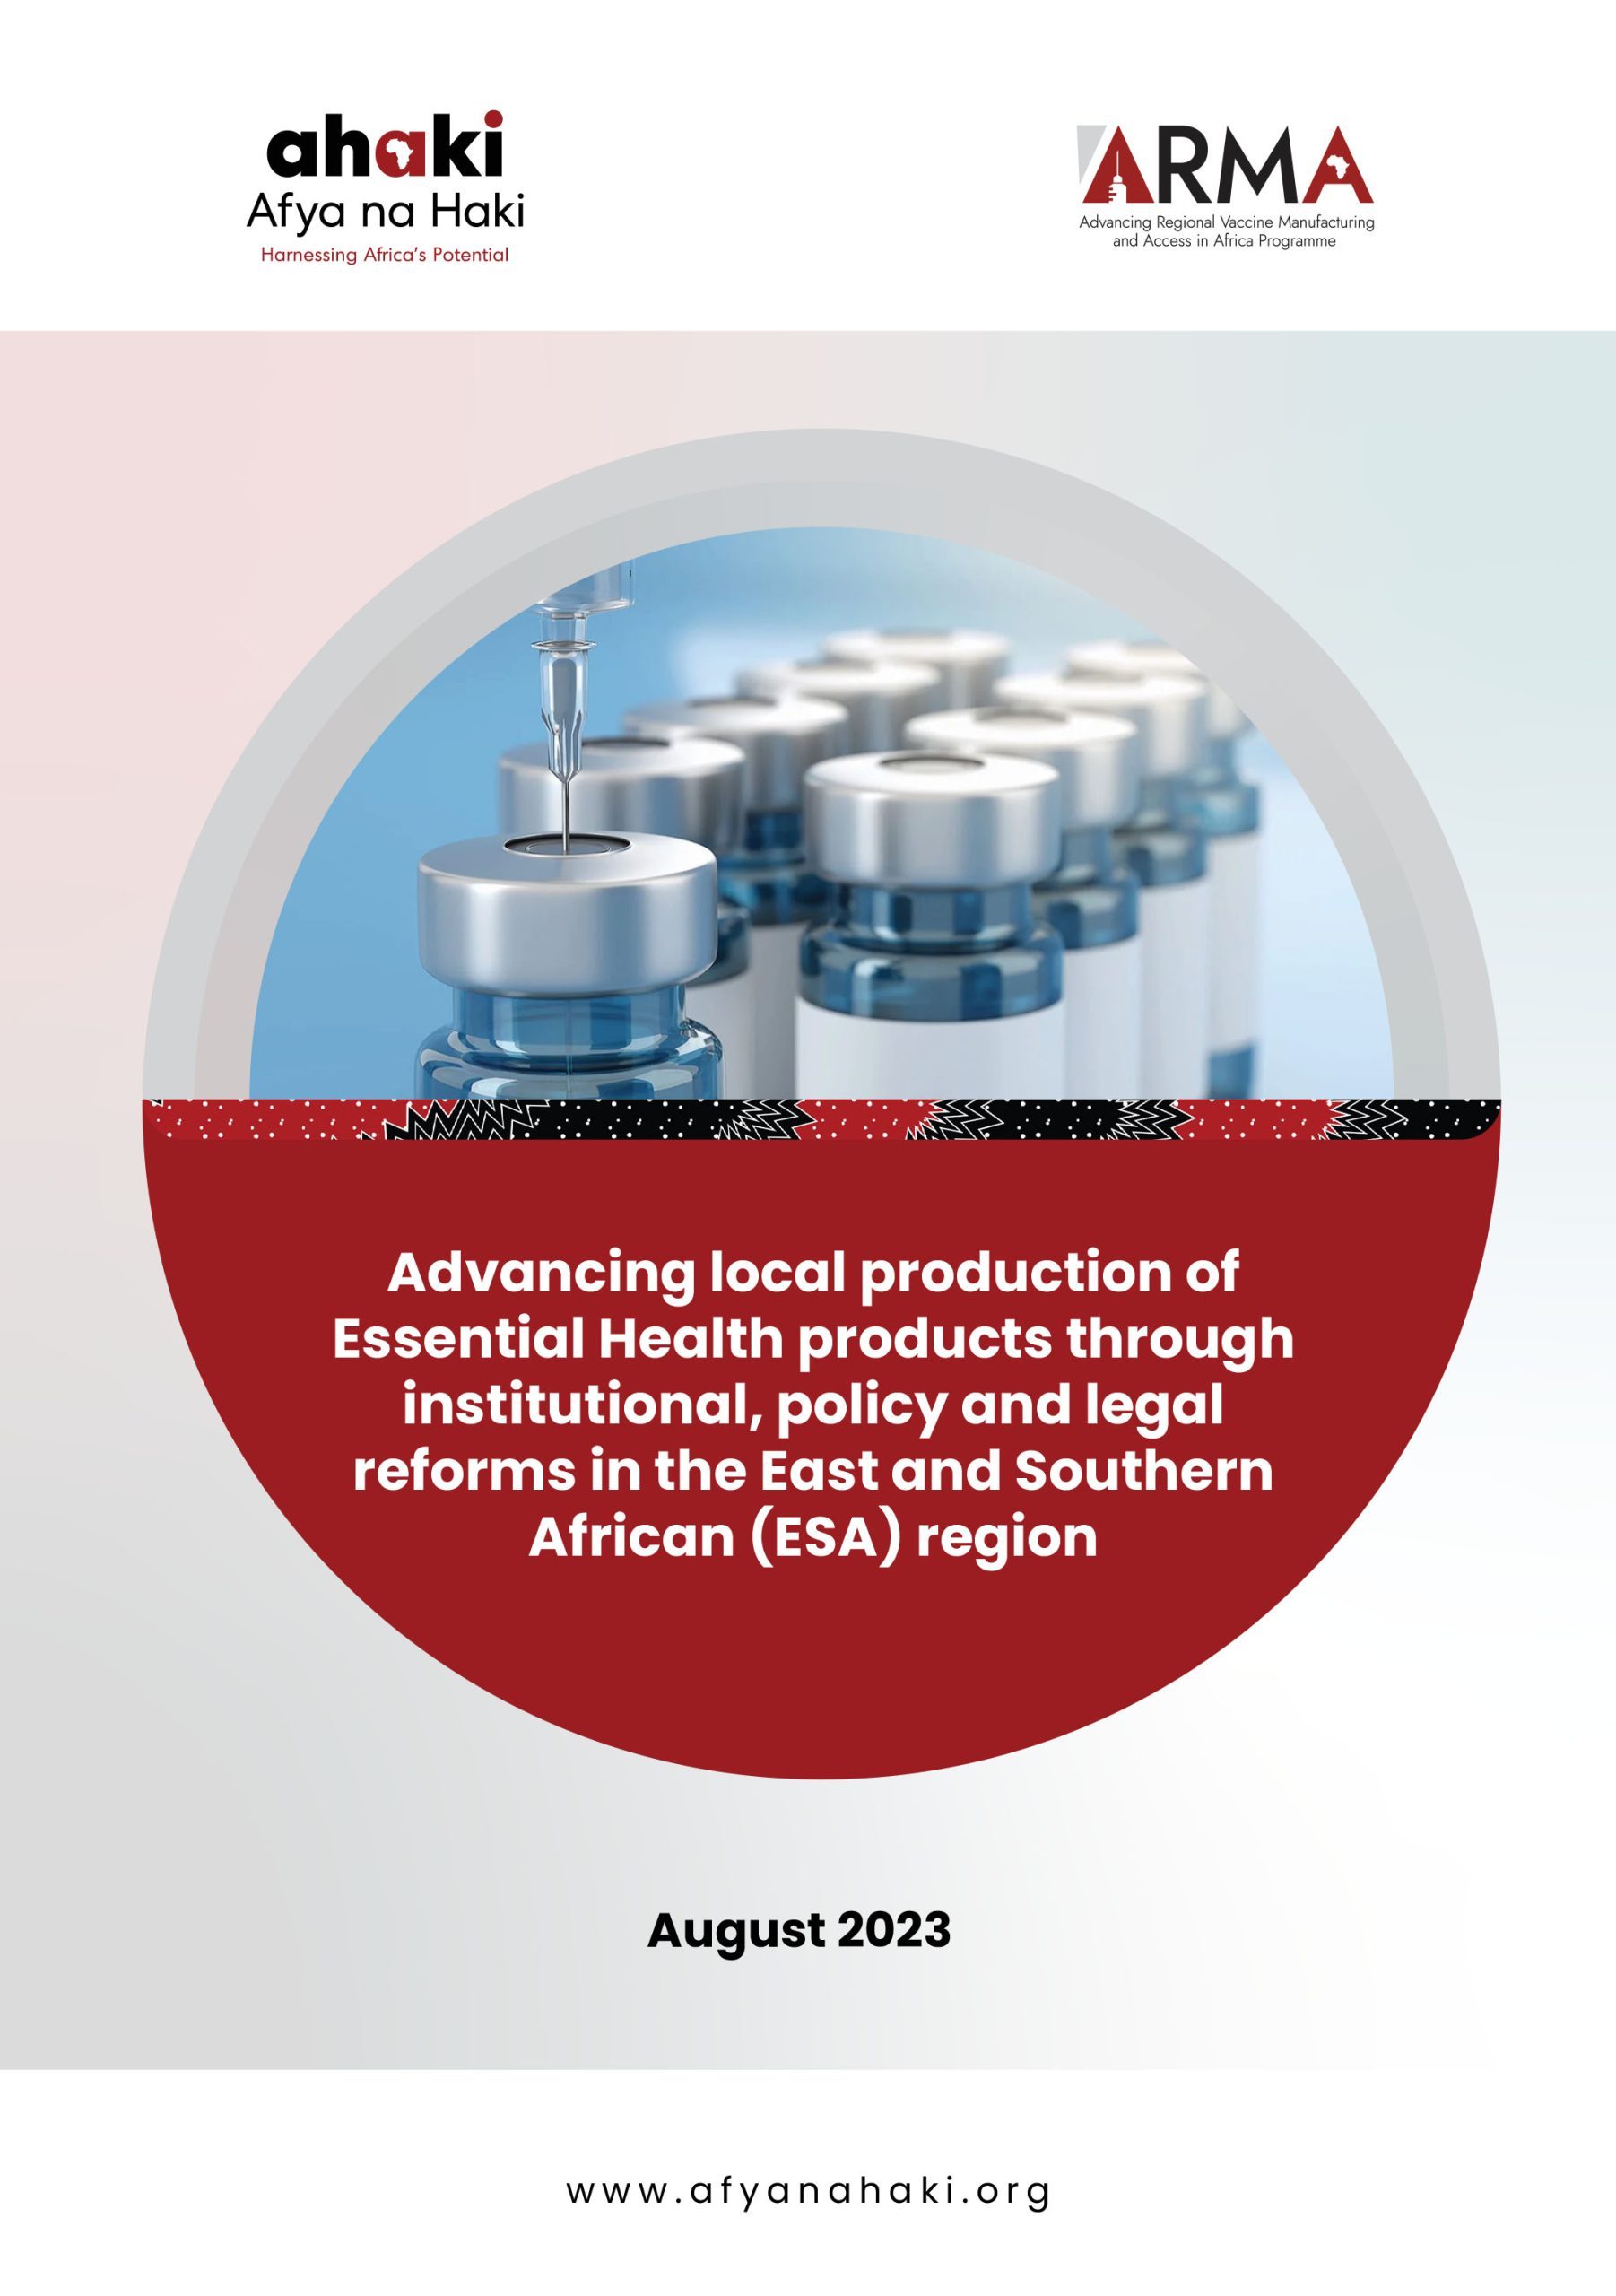 Advancing local production of Essential Health products through institutional, policy and legal reforms in the East and Southern African (ESA) region-1